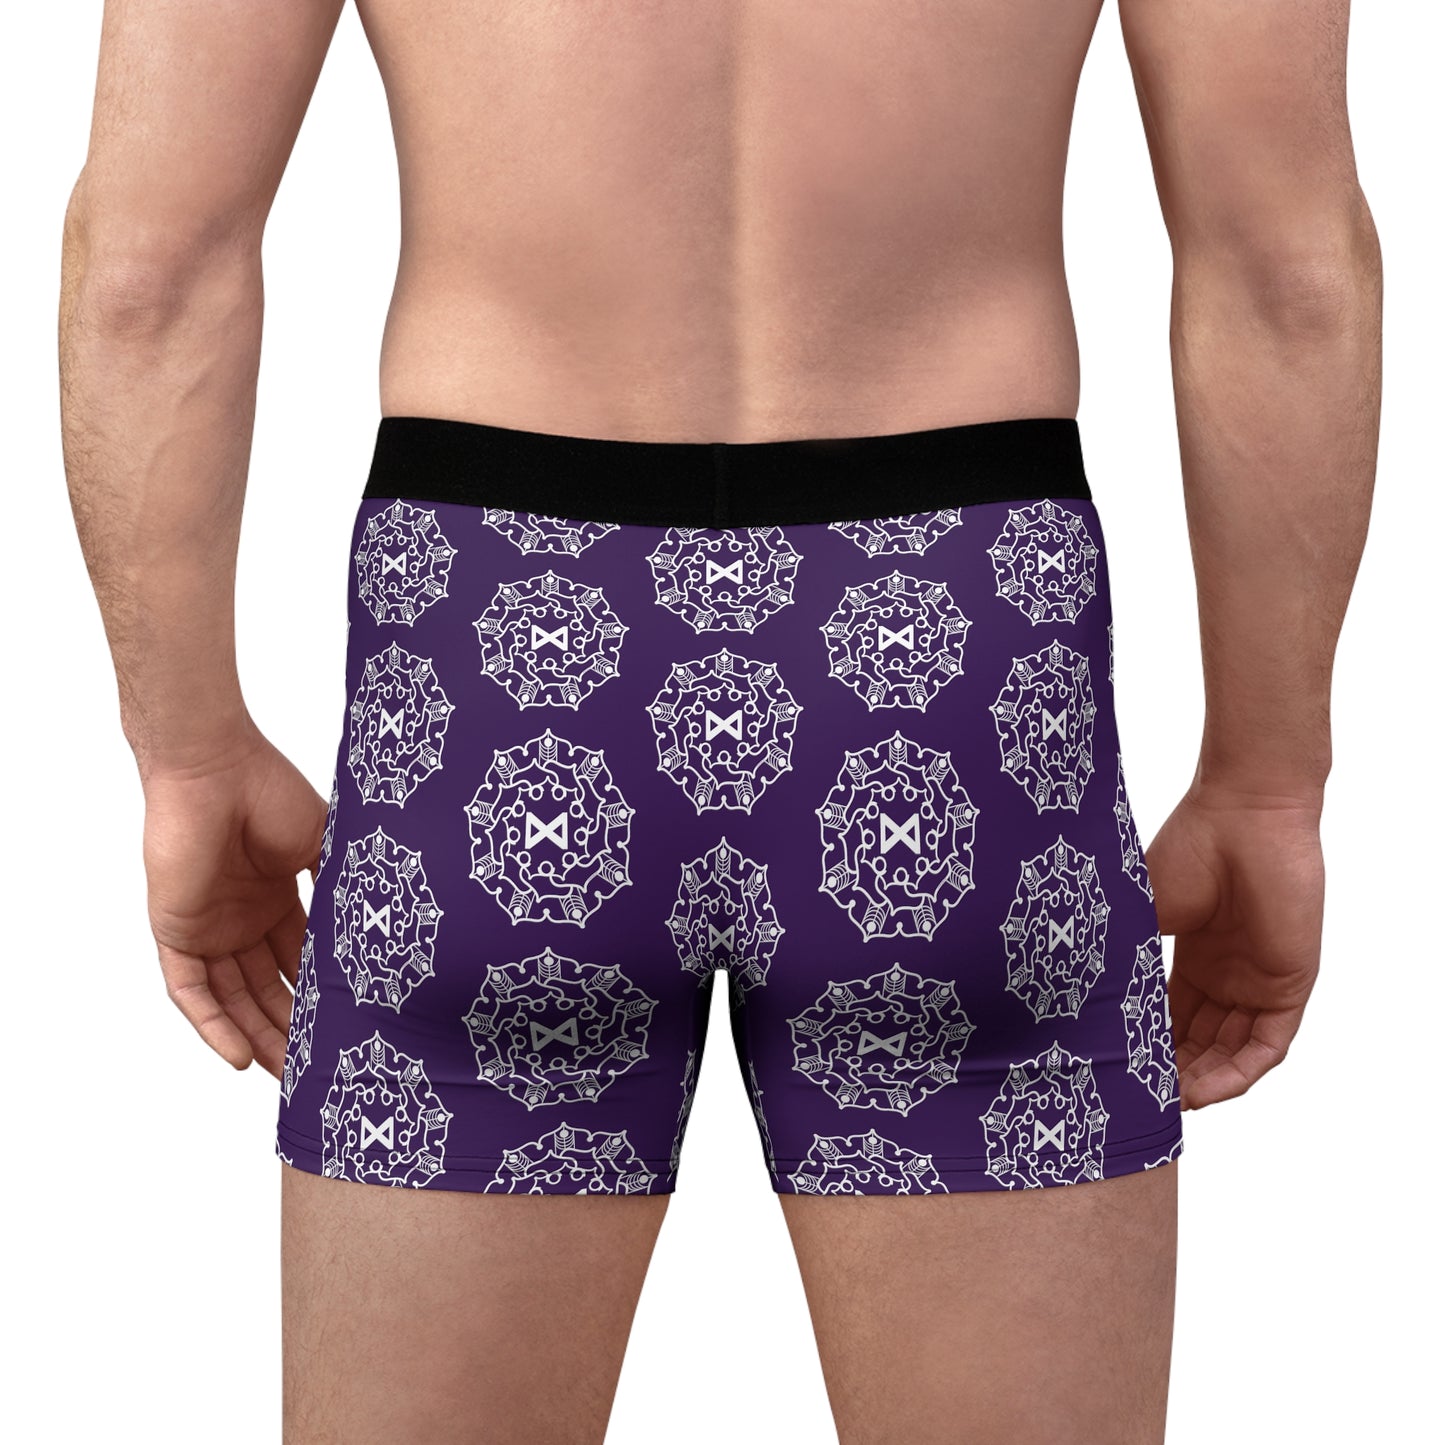 Spellcaster by Patti Negri Mackical Men's Boxer Briefs - Intuition